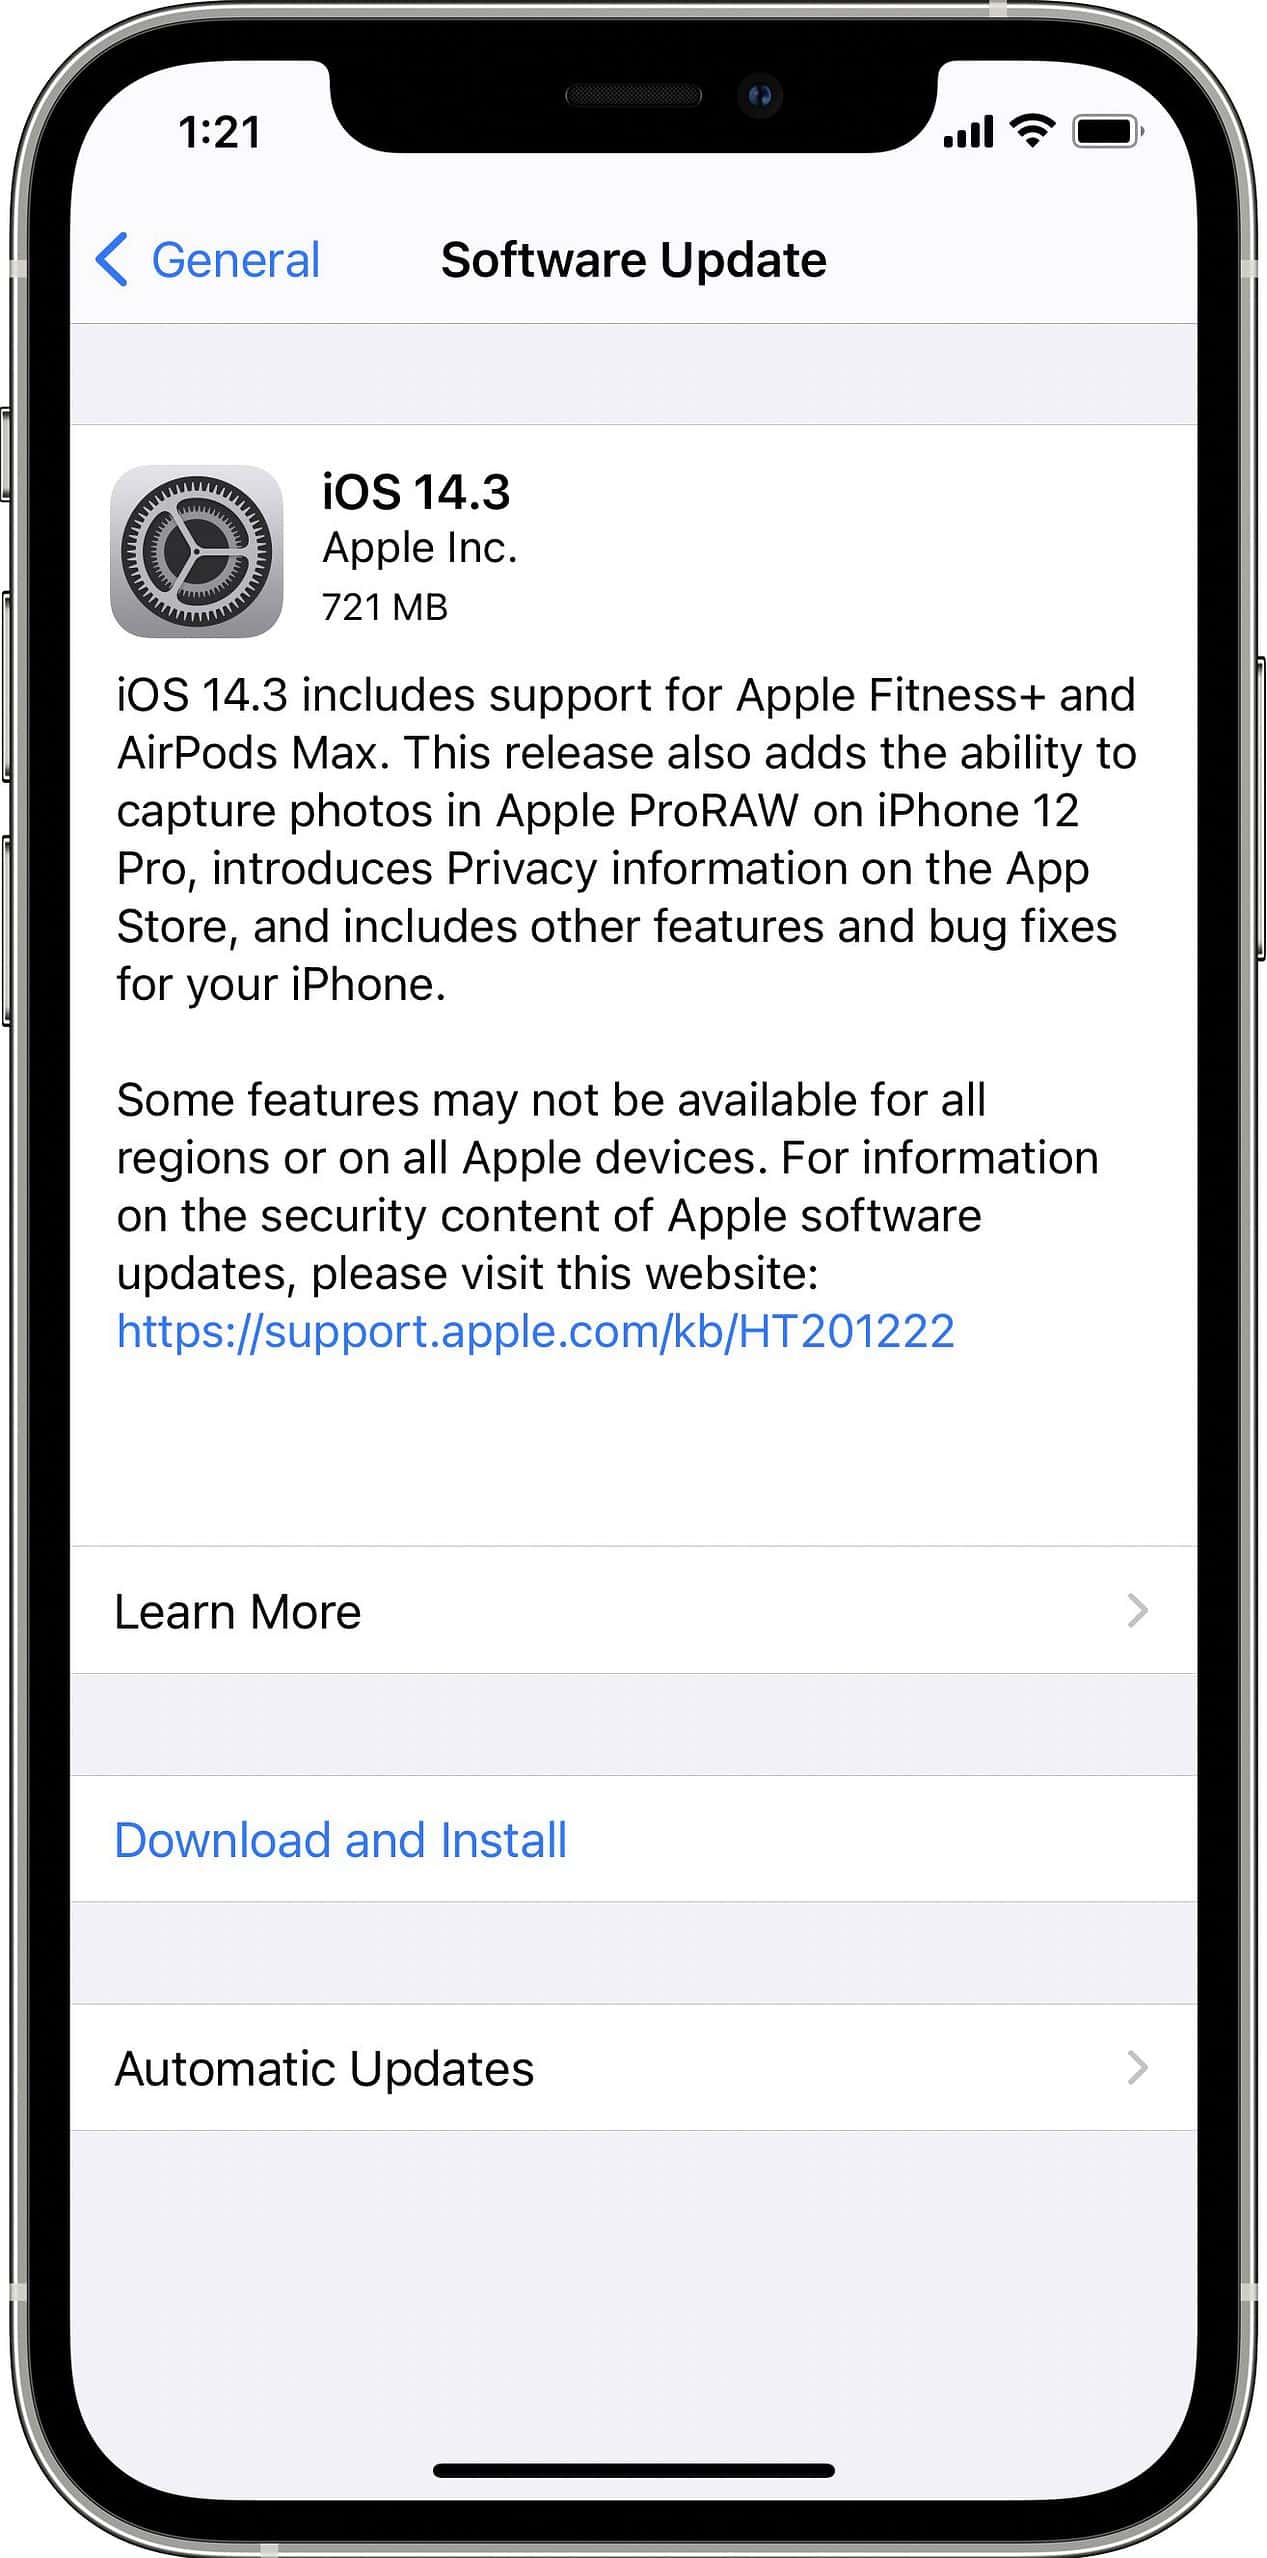 iOS 14.3 release notes